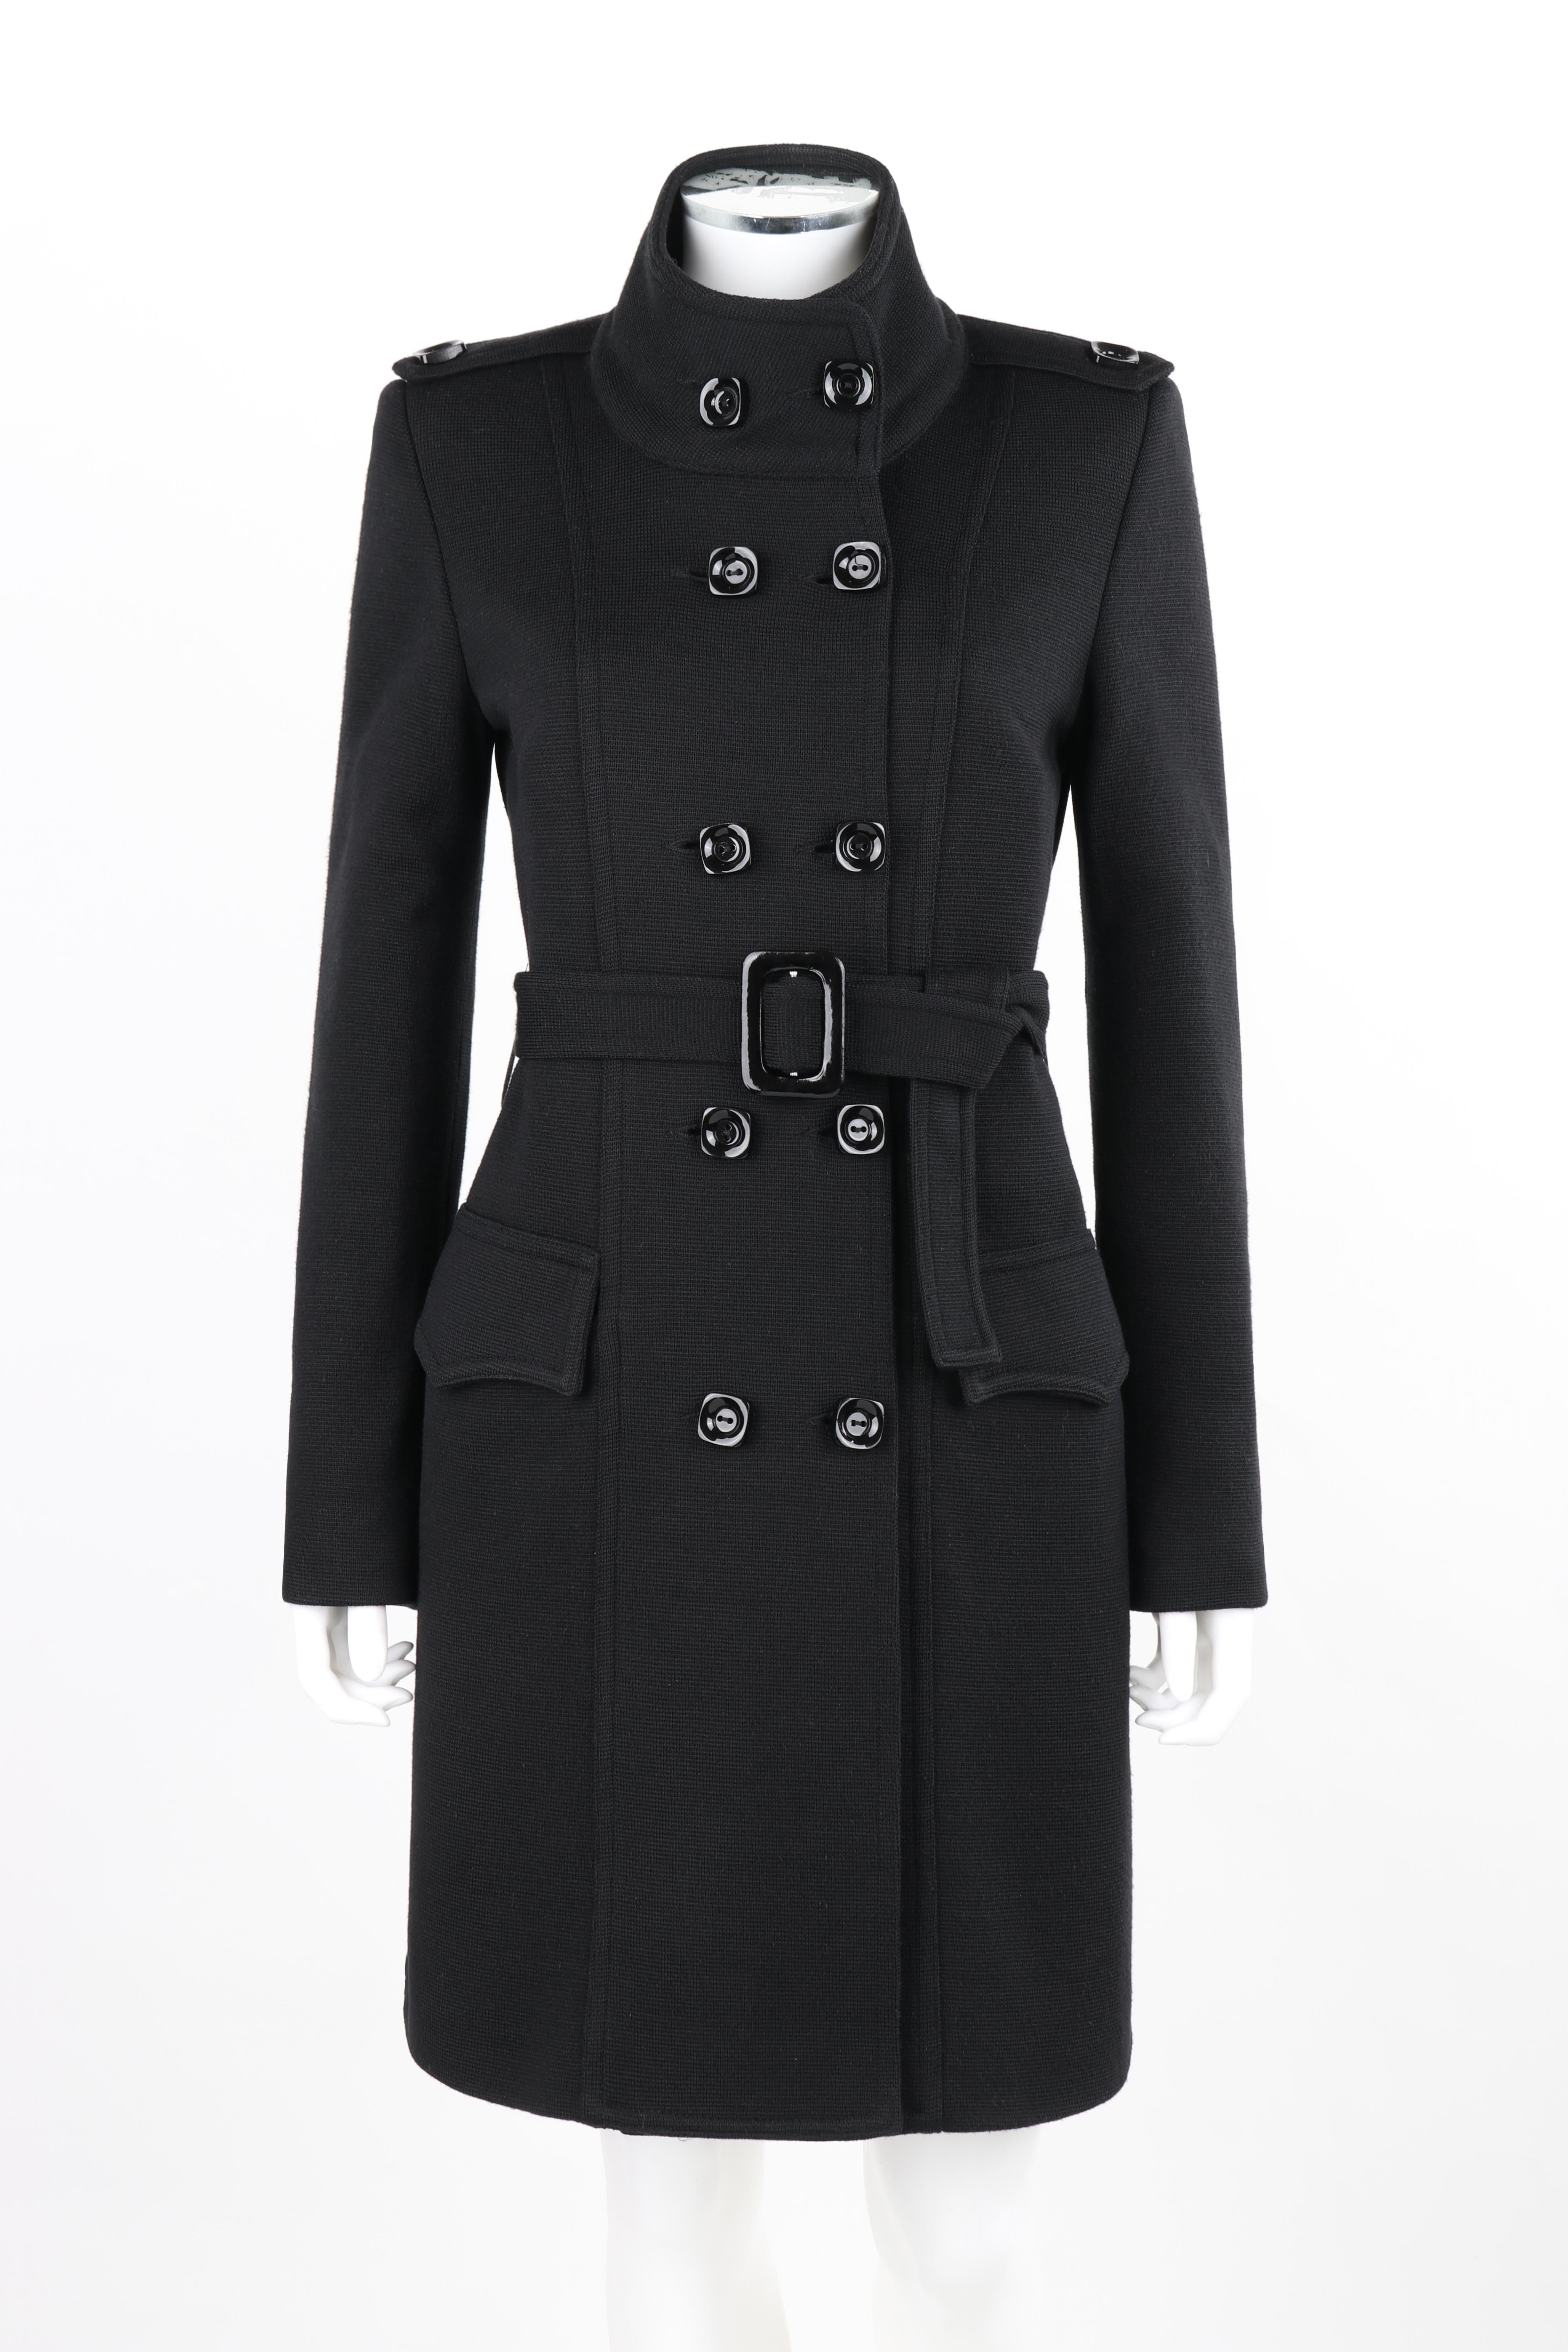 ALEXANDER McQUEEN c.1996 Black Belted Structured Double Breasted Overcoat Coat

Brand / Manufacturer: Alexander McQueen
Circa: 1996
Designer: Alexander McQueen
Style: Double Breasted Coat
Color(s): Black
Lined: Yes
Marked Fabric: 92% Viscose, 8%